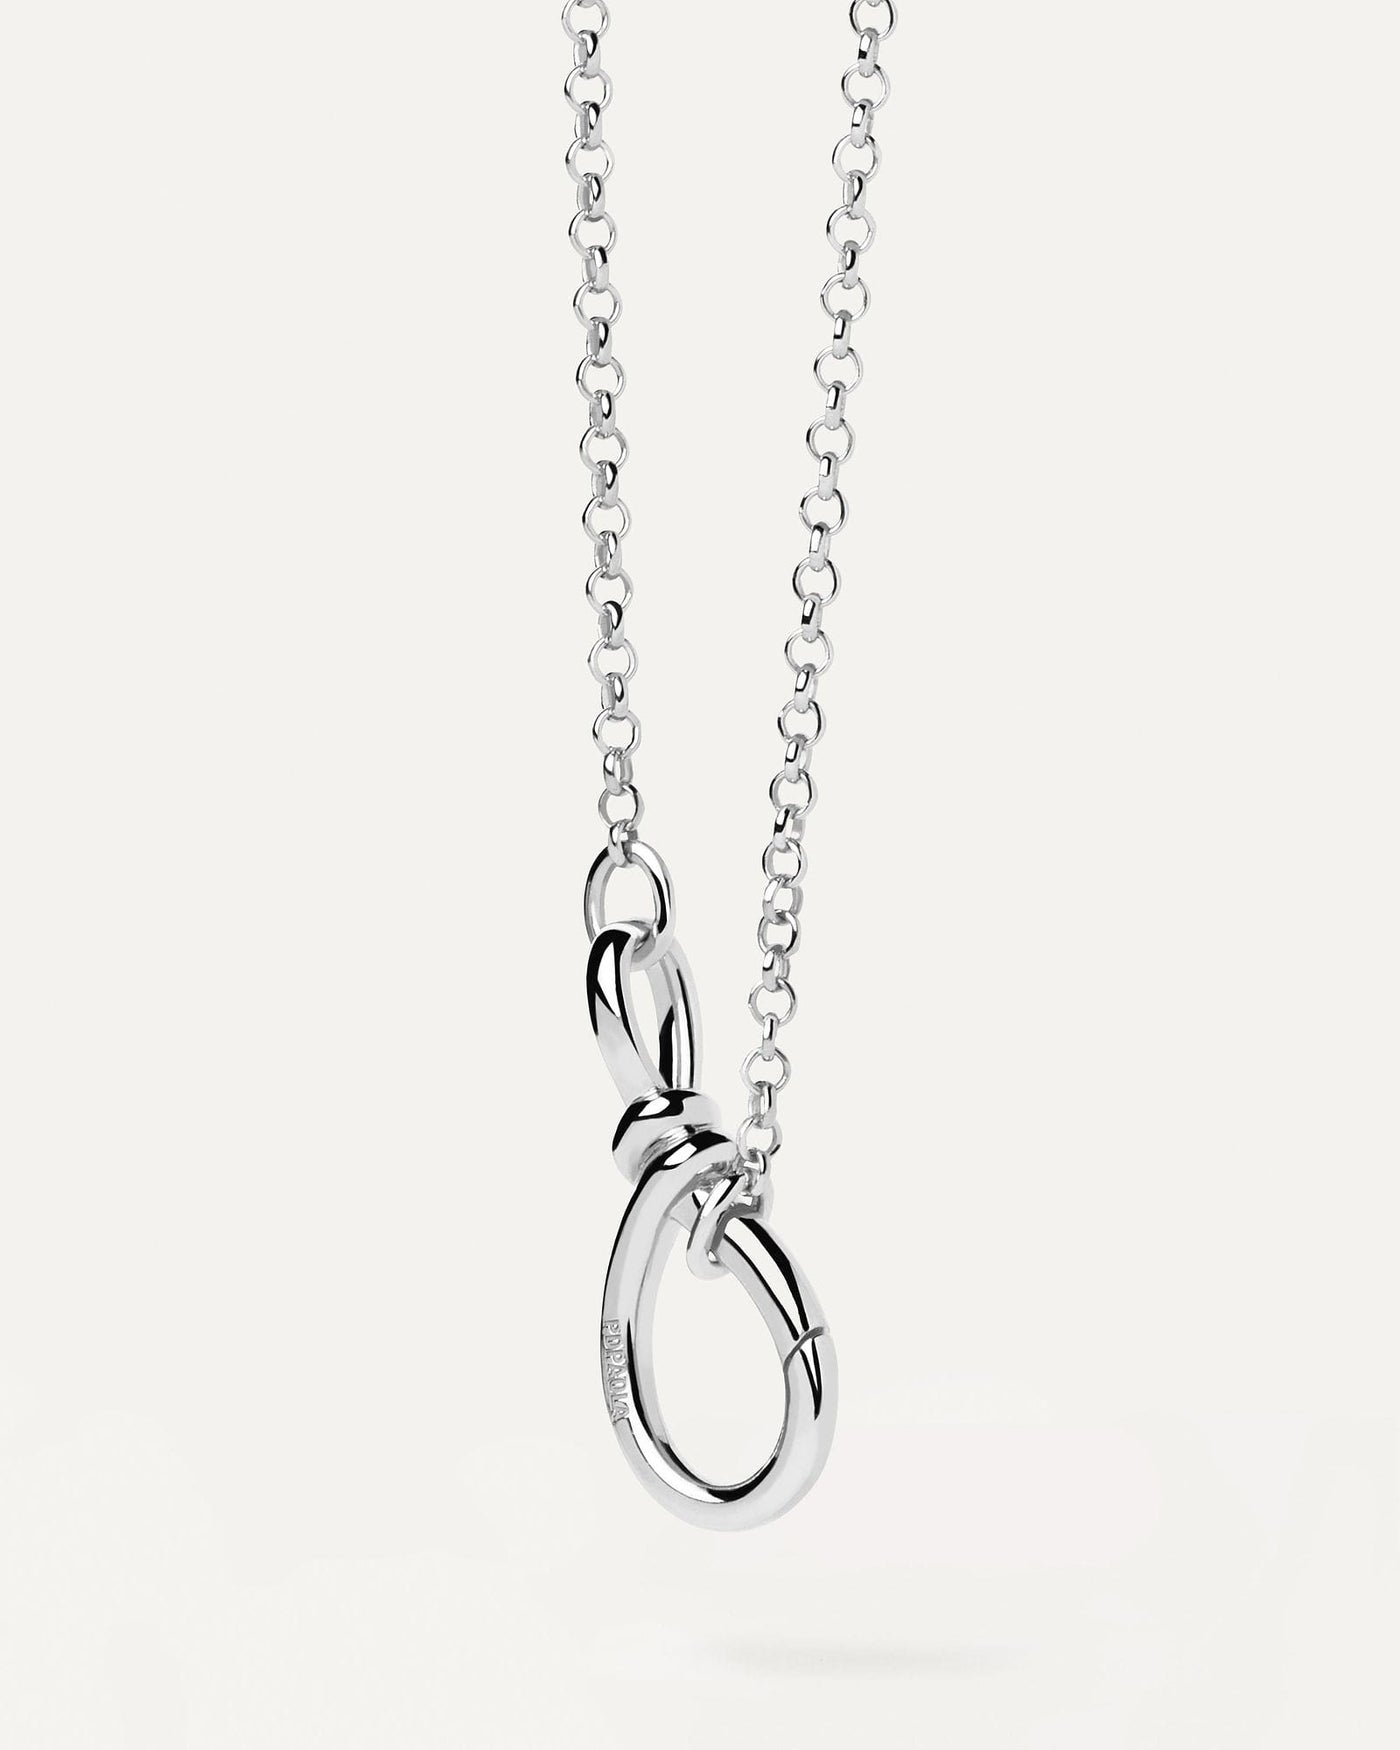 2024 Selection | Stacker Clasp Silver Chain Necklace. Get the latest arrival from PDPAOLA. Place your order safely and get this Best Seller. Free Shipping.